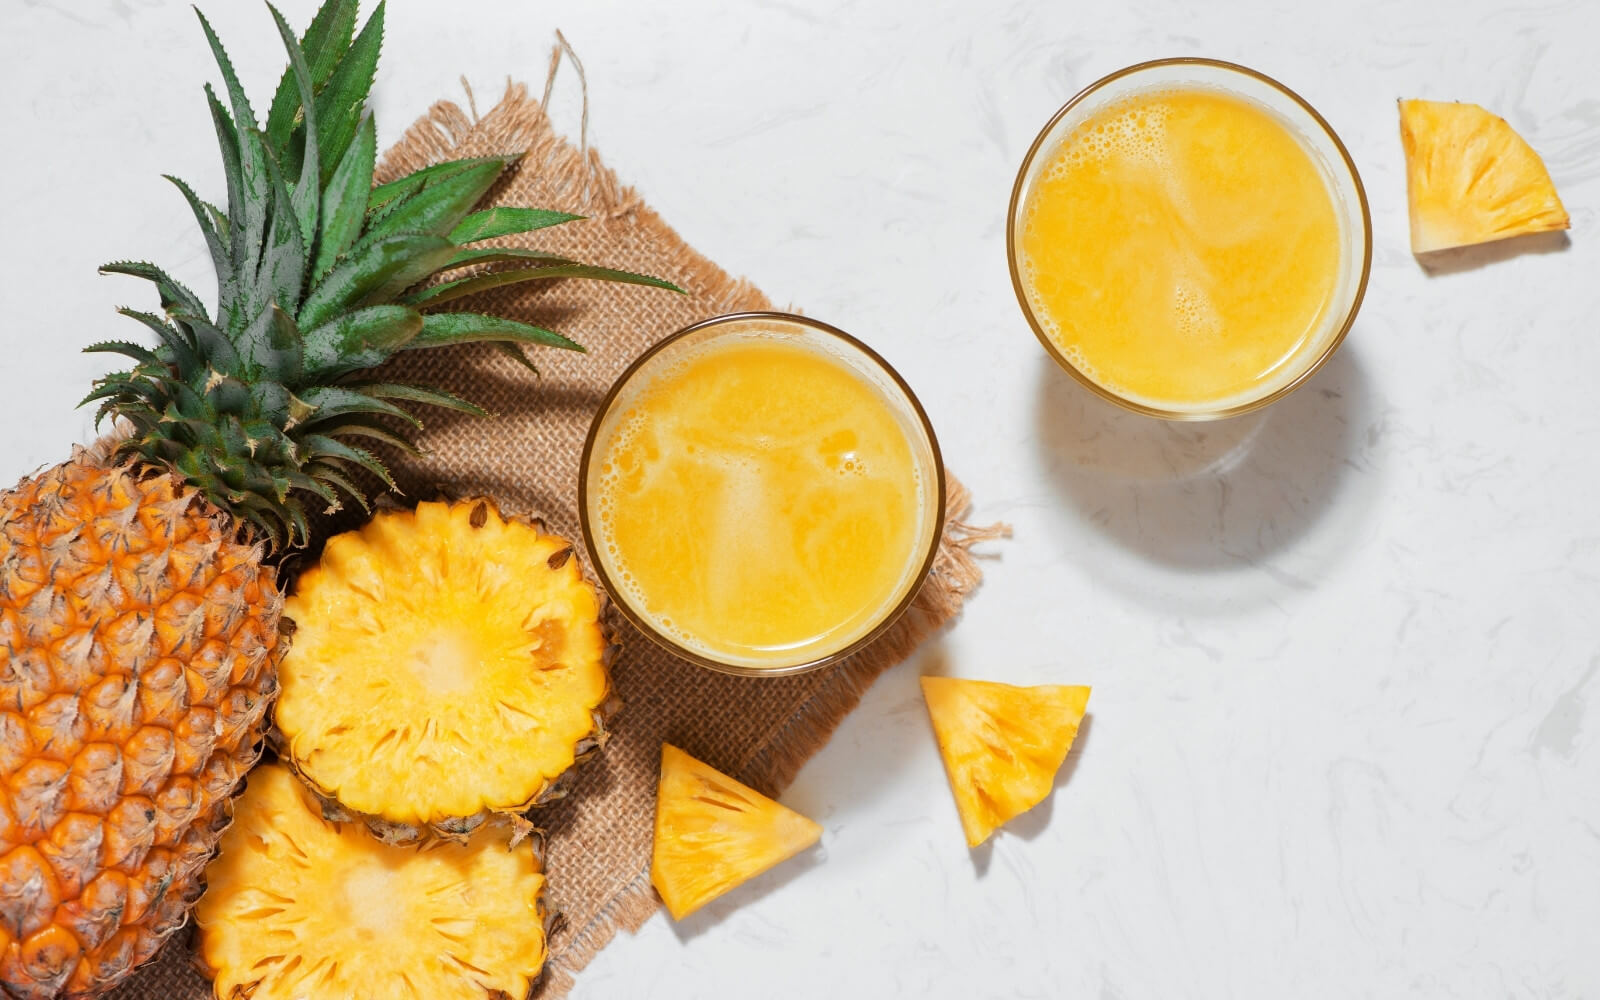 What Are Benefits of Pineapple?